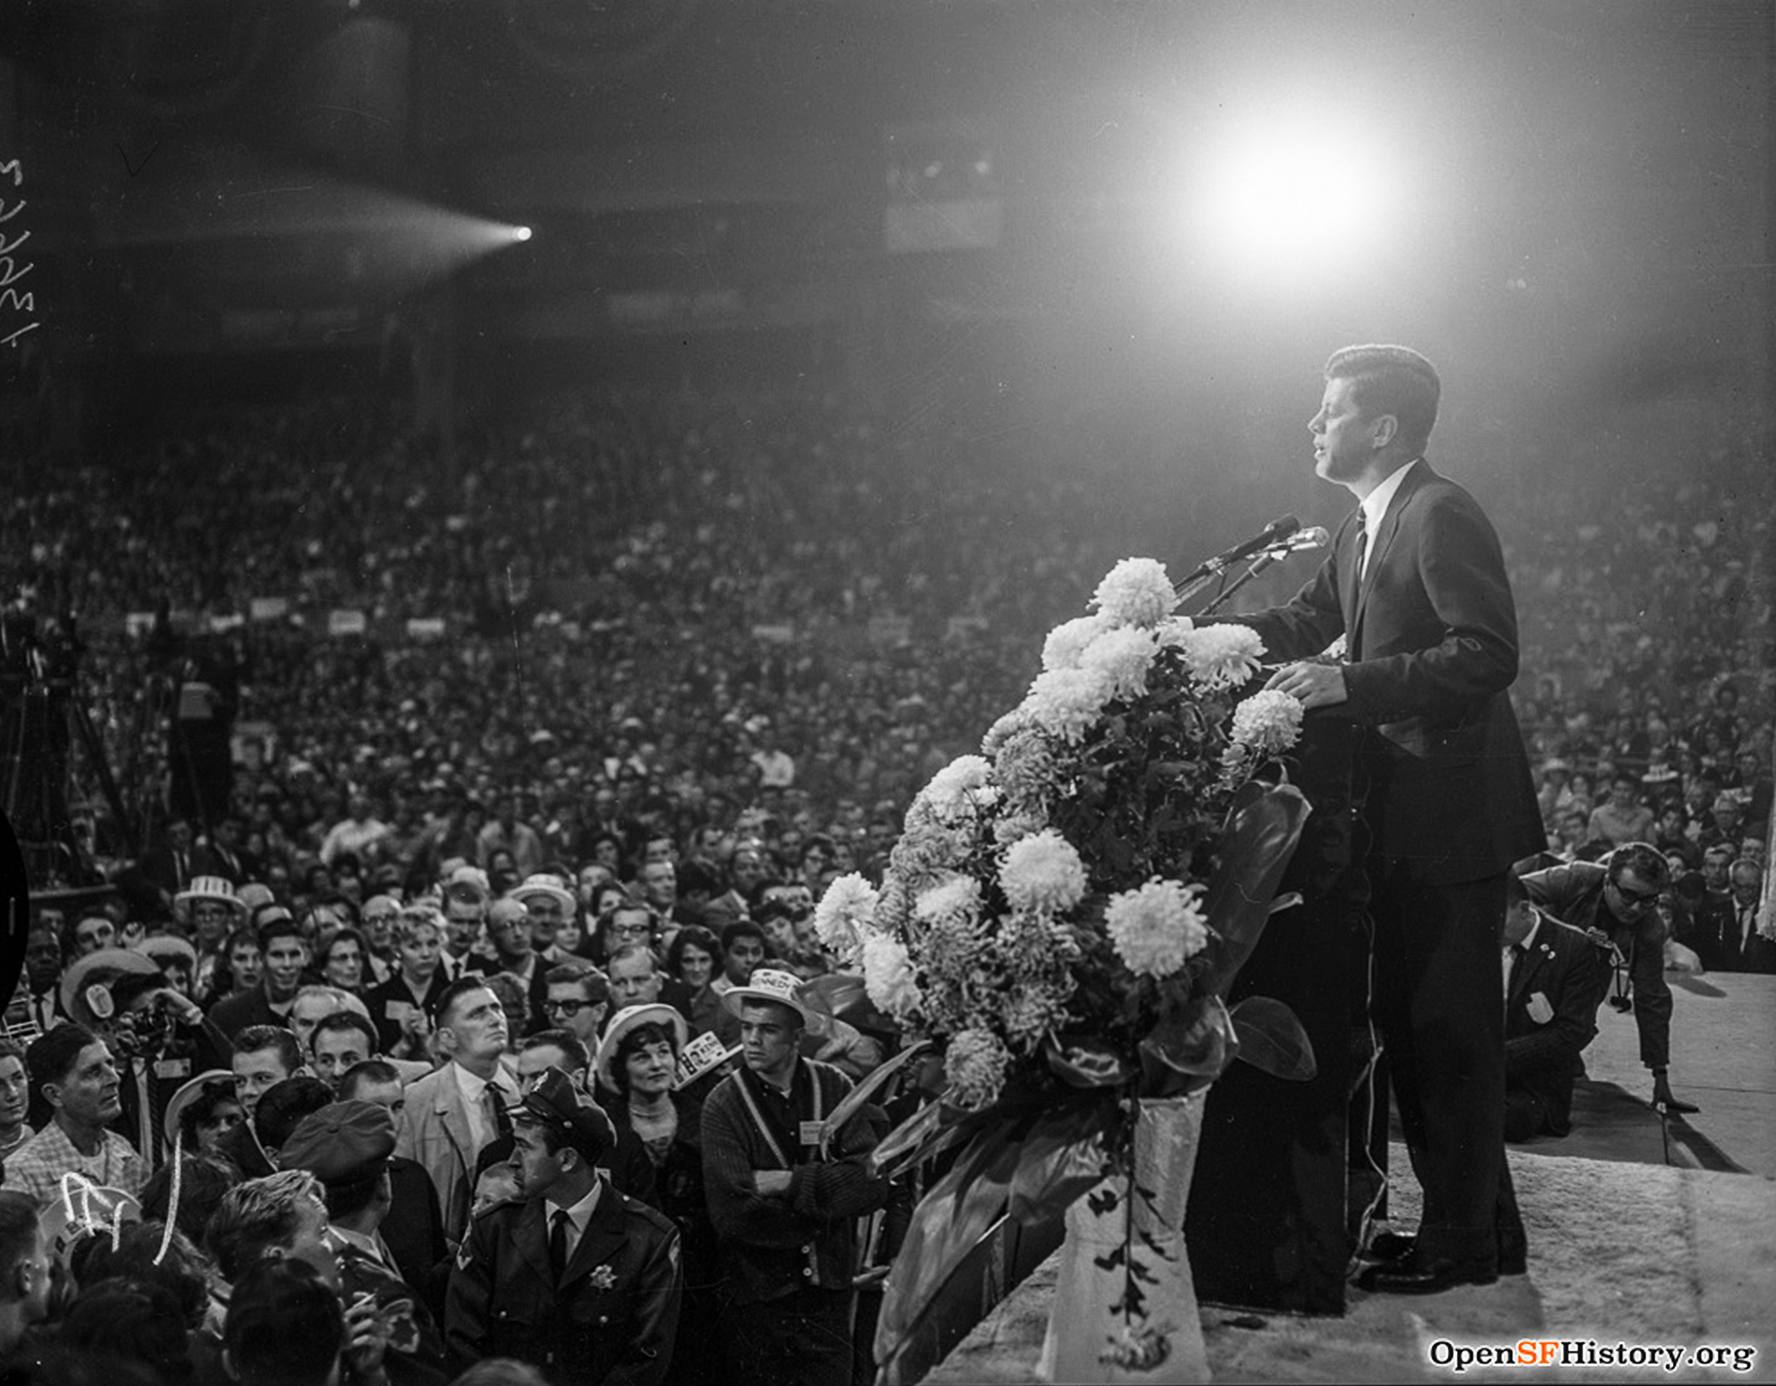 President John F. Kennedy speaks at a podium with flowers, facing a large, attentive crowd in an arena.